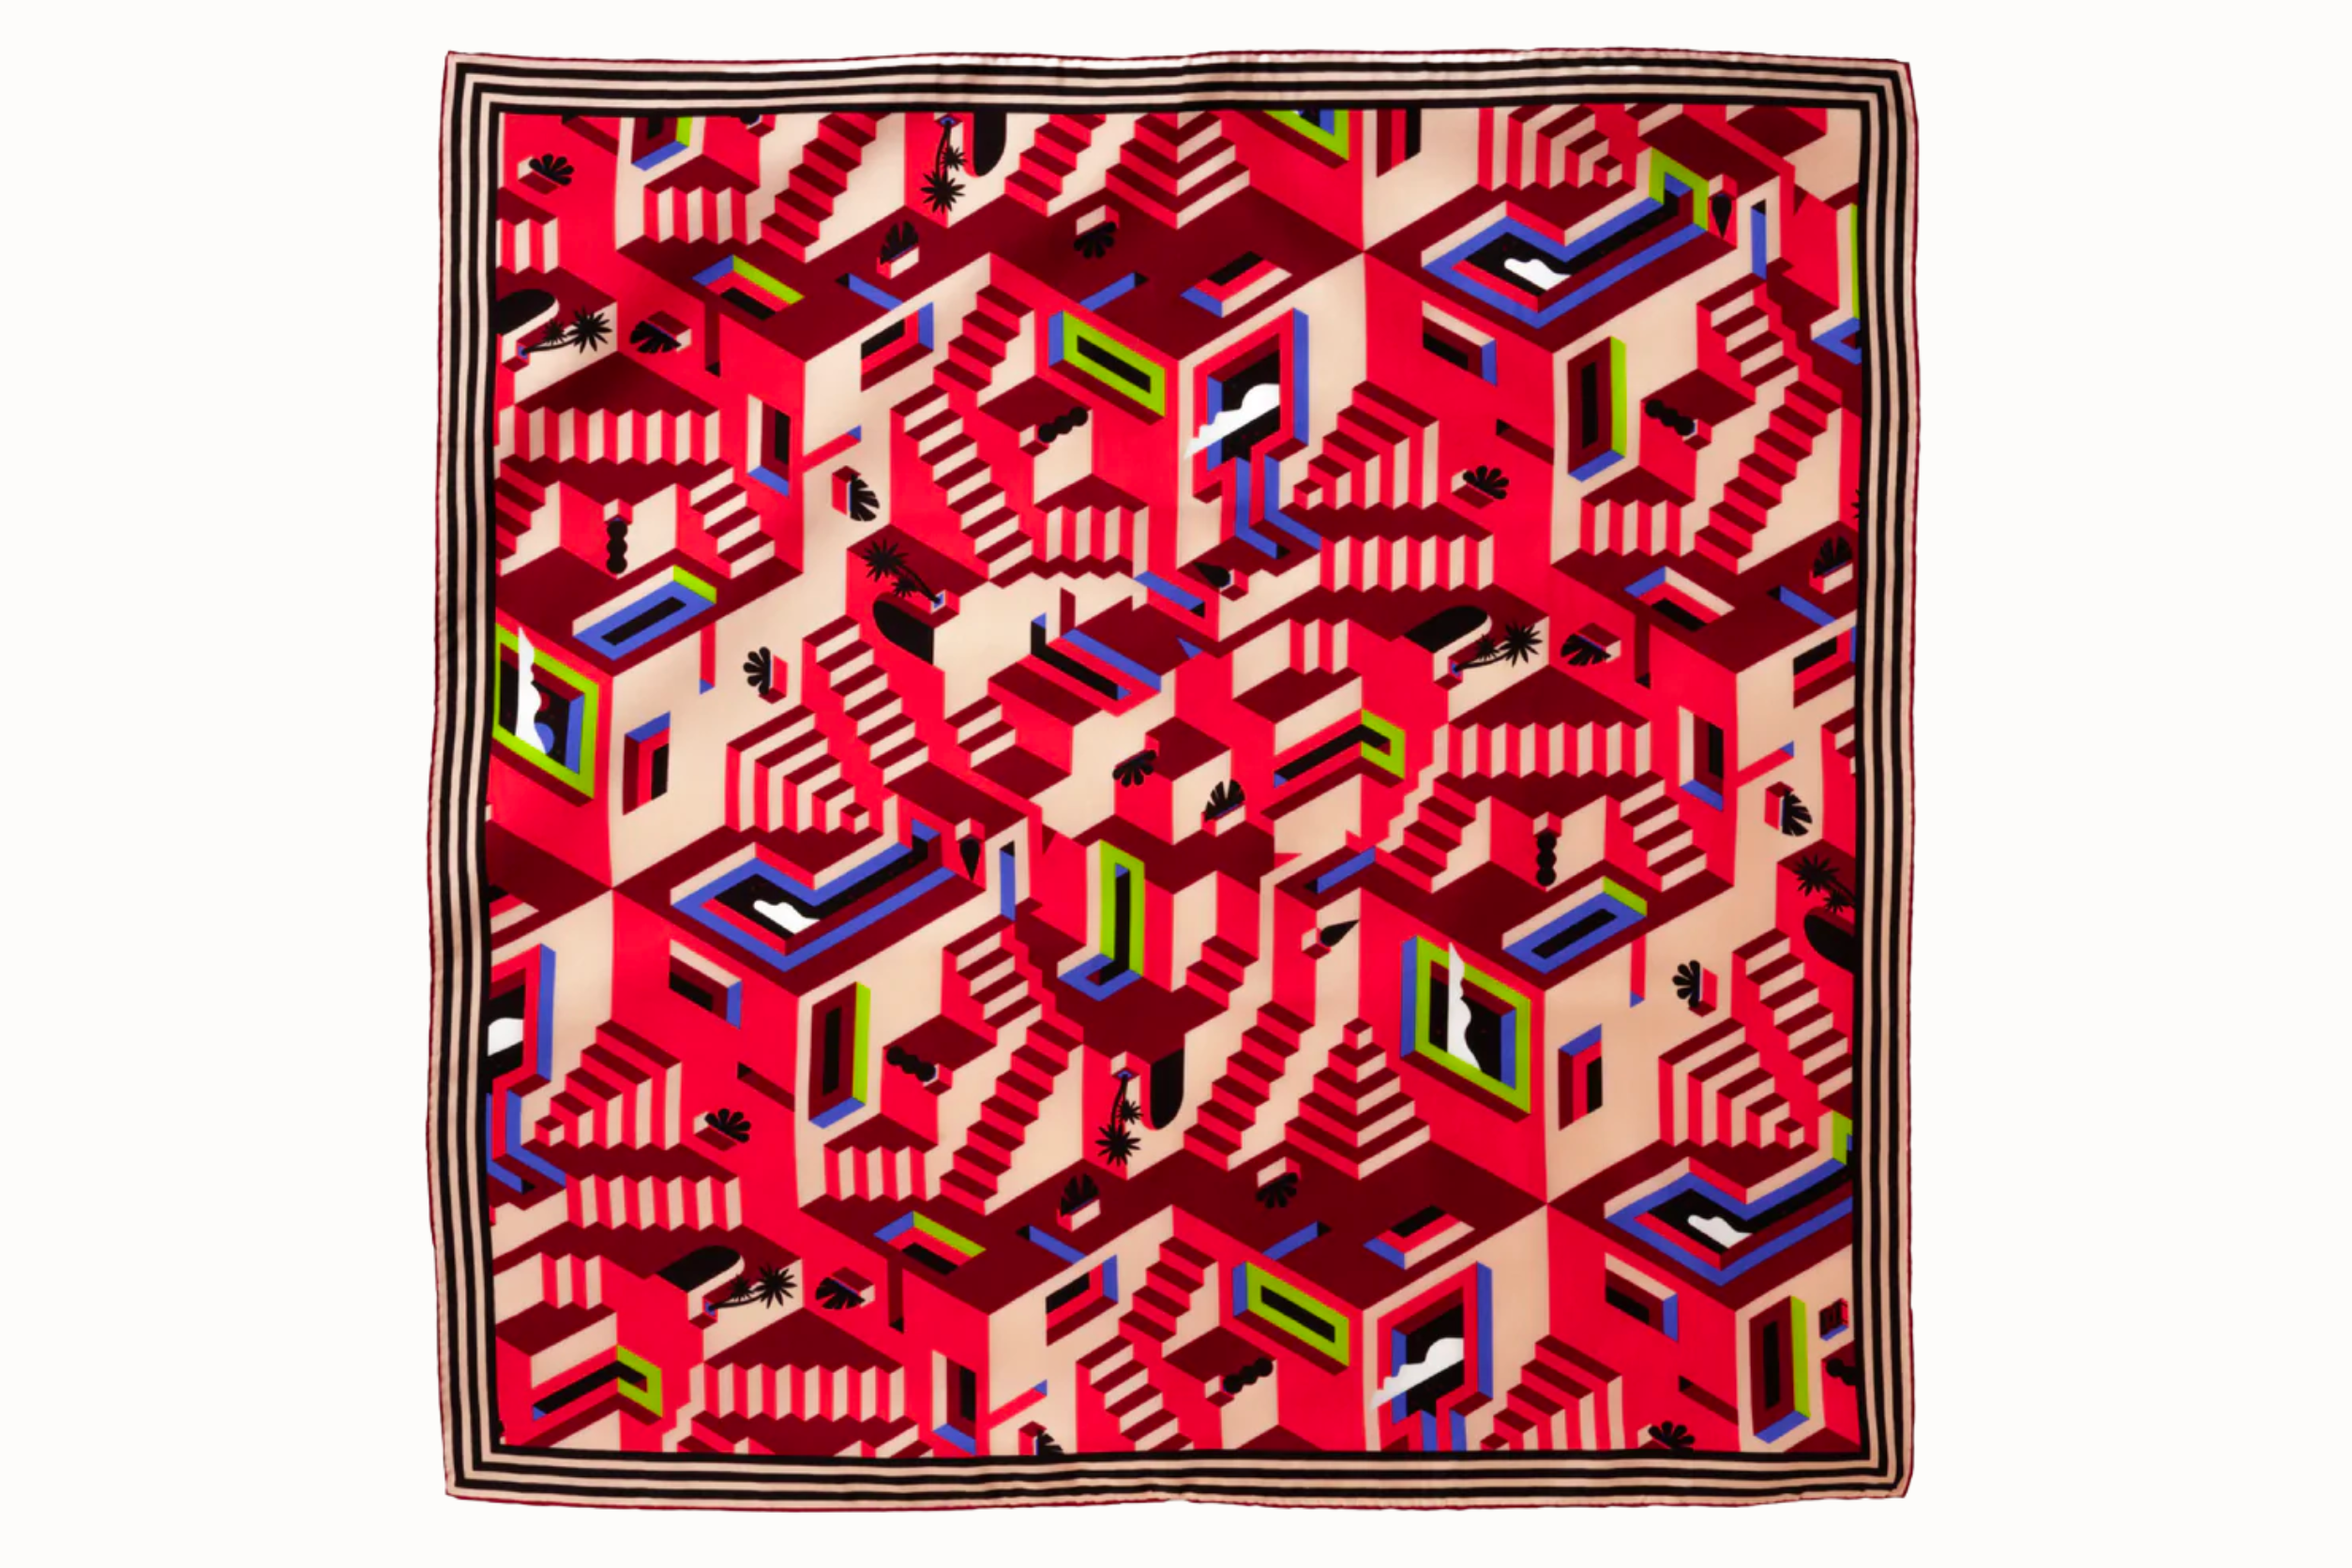 Flat lay image of 100% silk square scarf featuring a motif of interlocking staircases and platforms in various shades of red accented with pops of blue and green. A neutral stripe border around the scarves' edges.